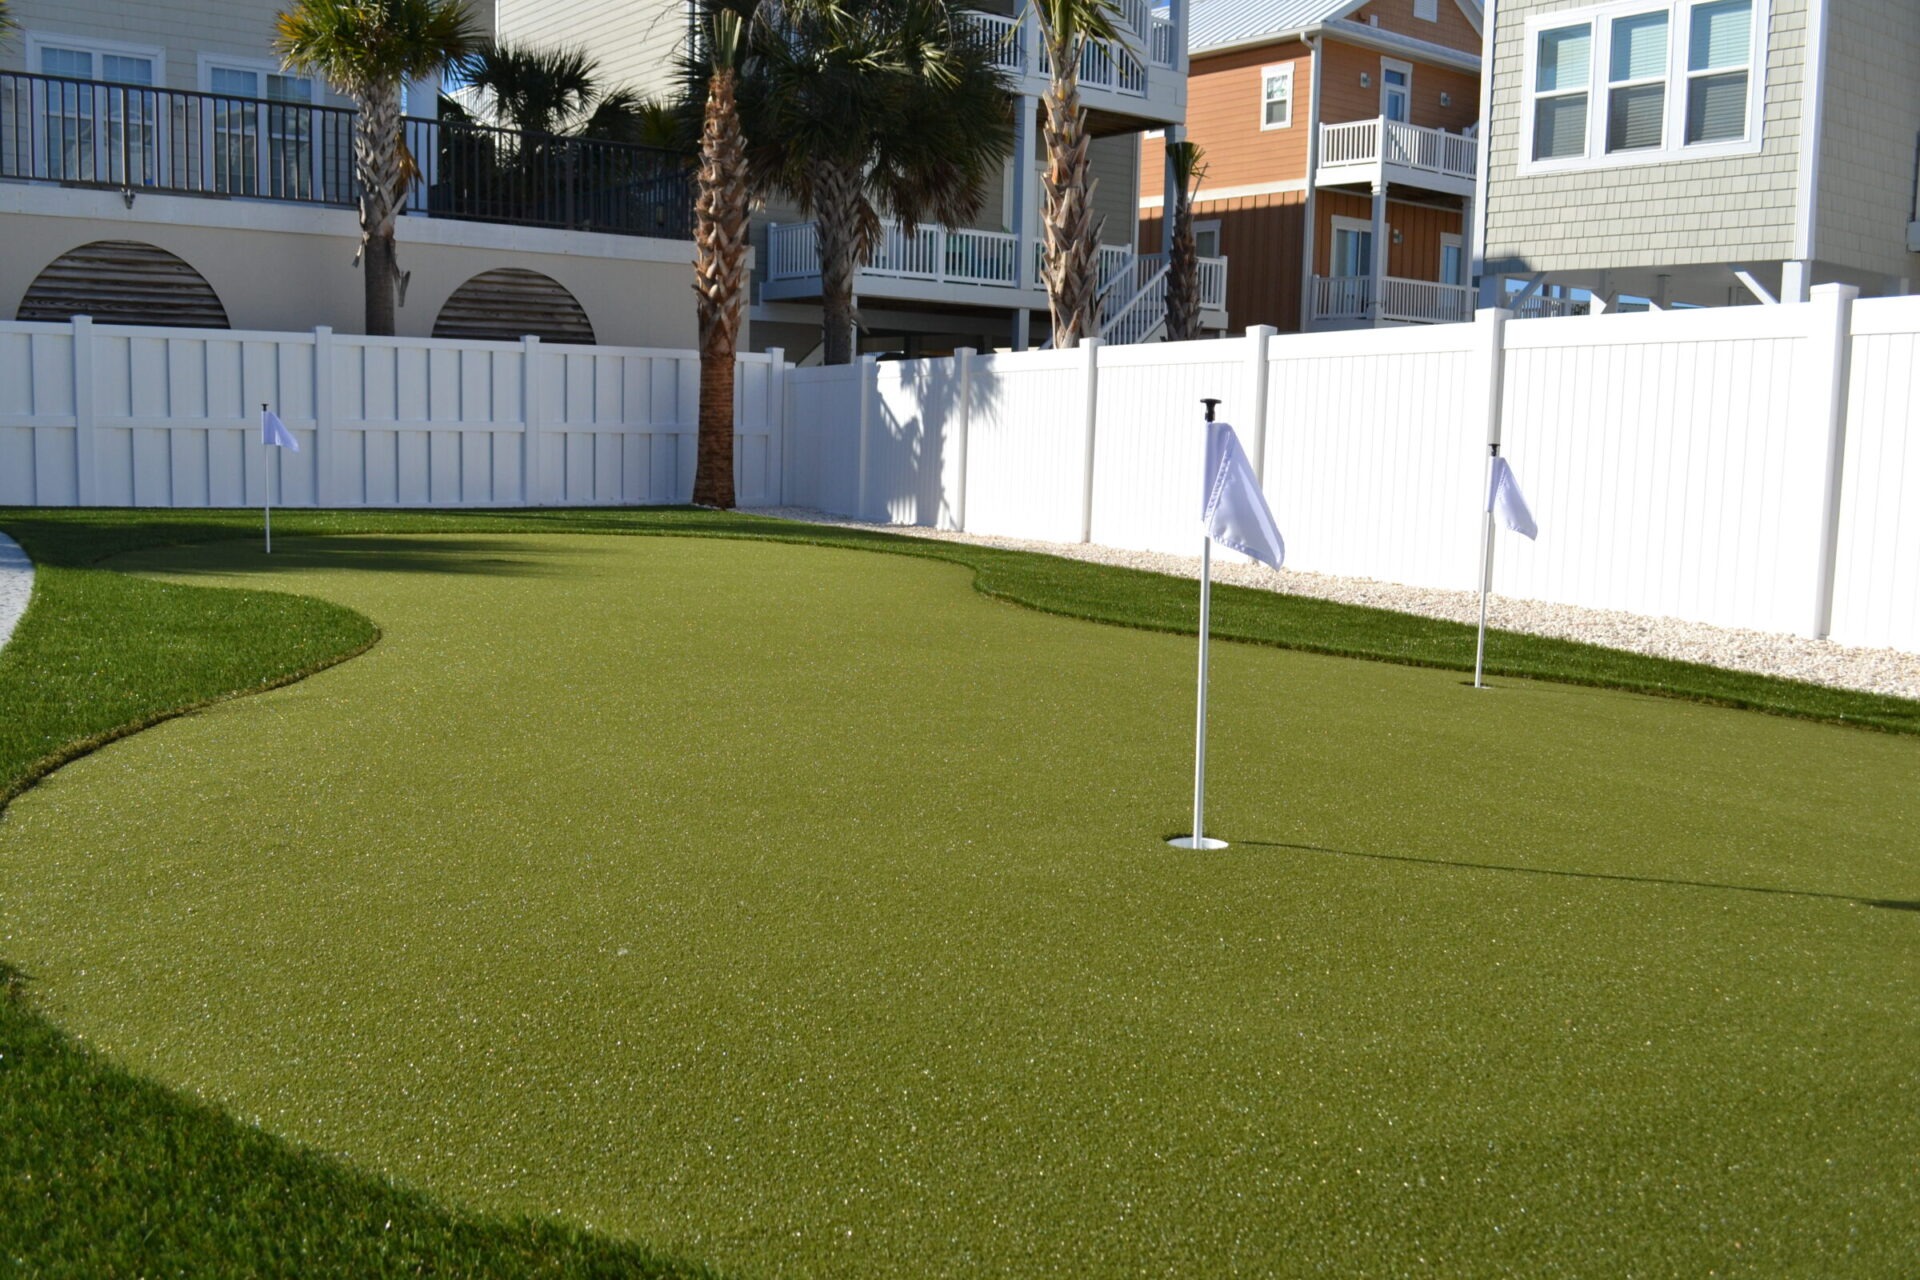 The image shows a well-manicured artificial turf putting green with multiple holes and flags, bordered by a white fence and residential buildings behind.